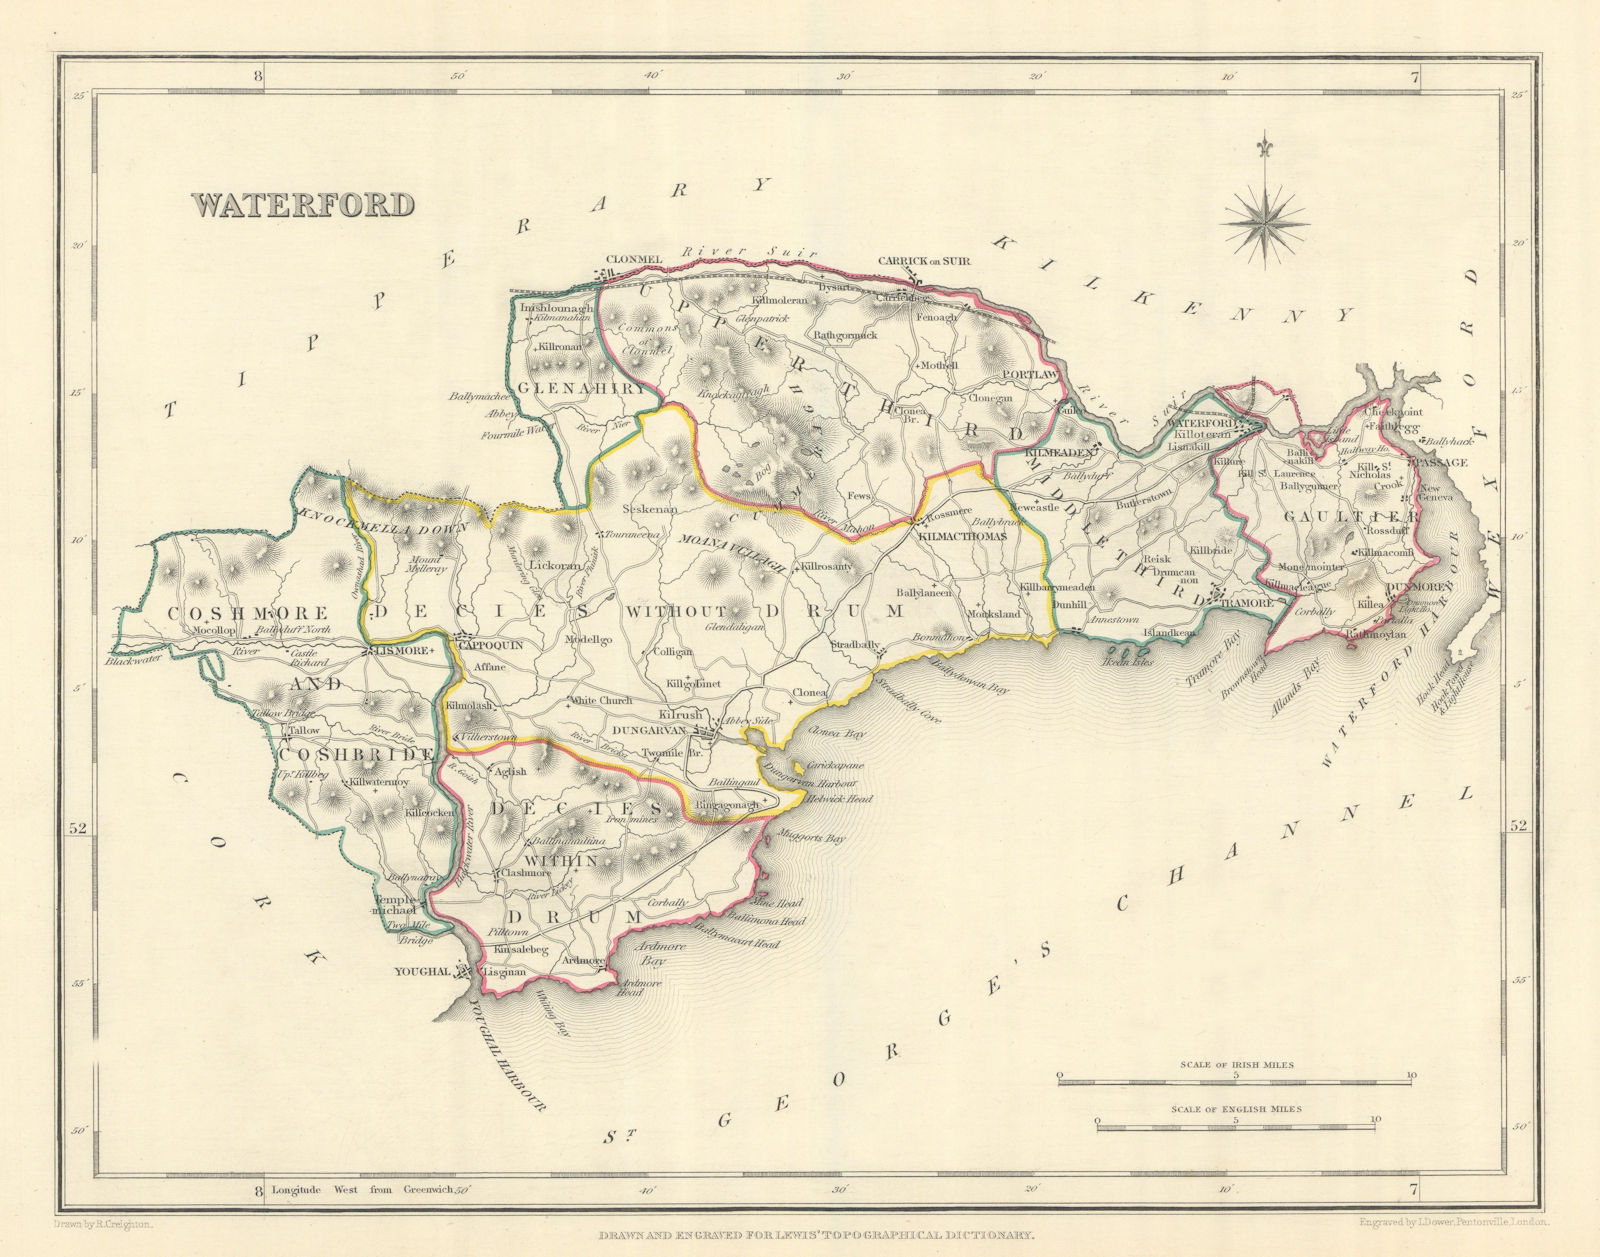 COUNTY WATERFORD antique map for LEWIS by CREIGHTON & DOWER. Ireland 1850